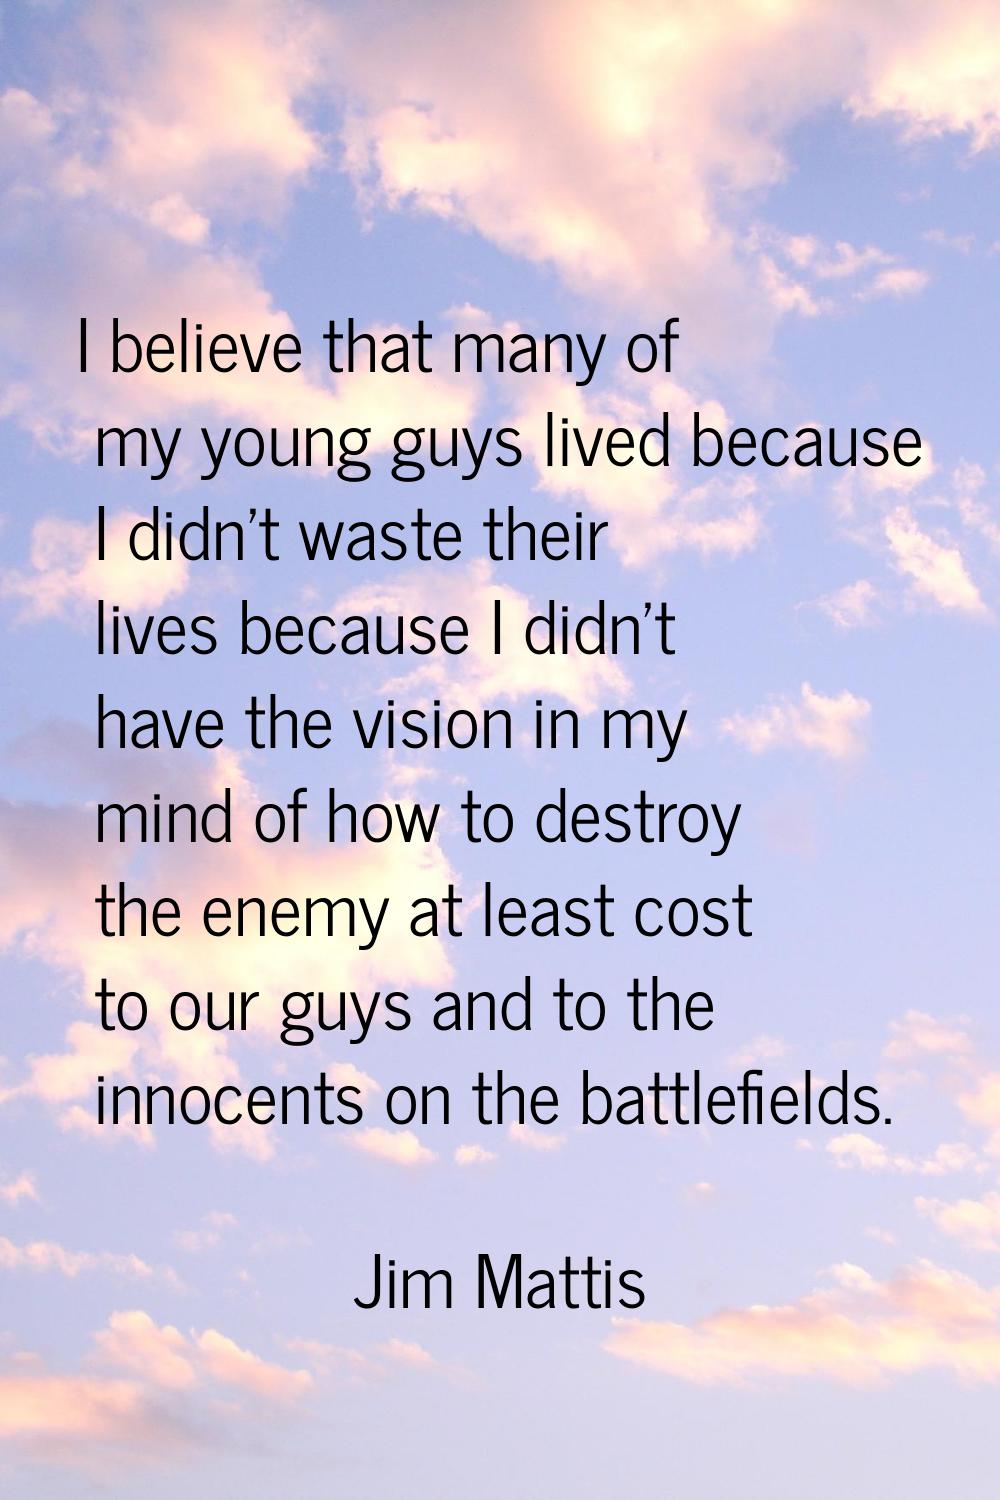 I believe that many of my young guys lived because I didn't waste their lives because I didn't have